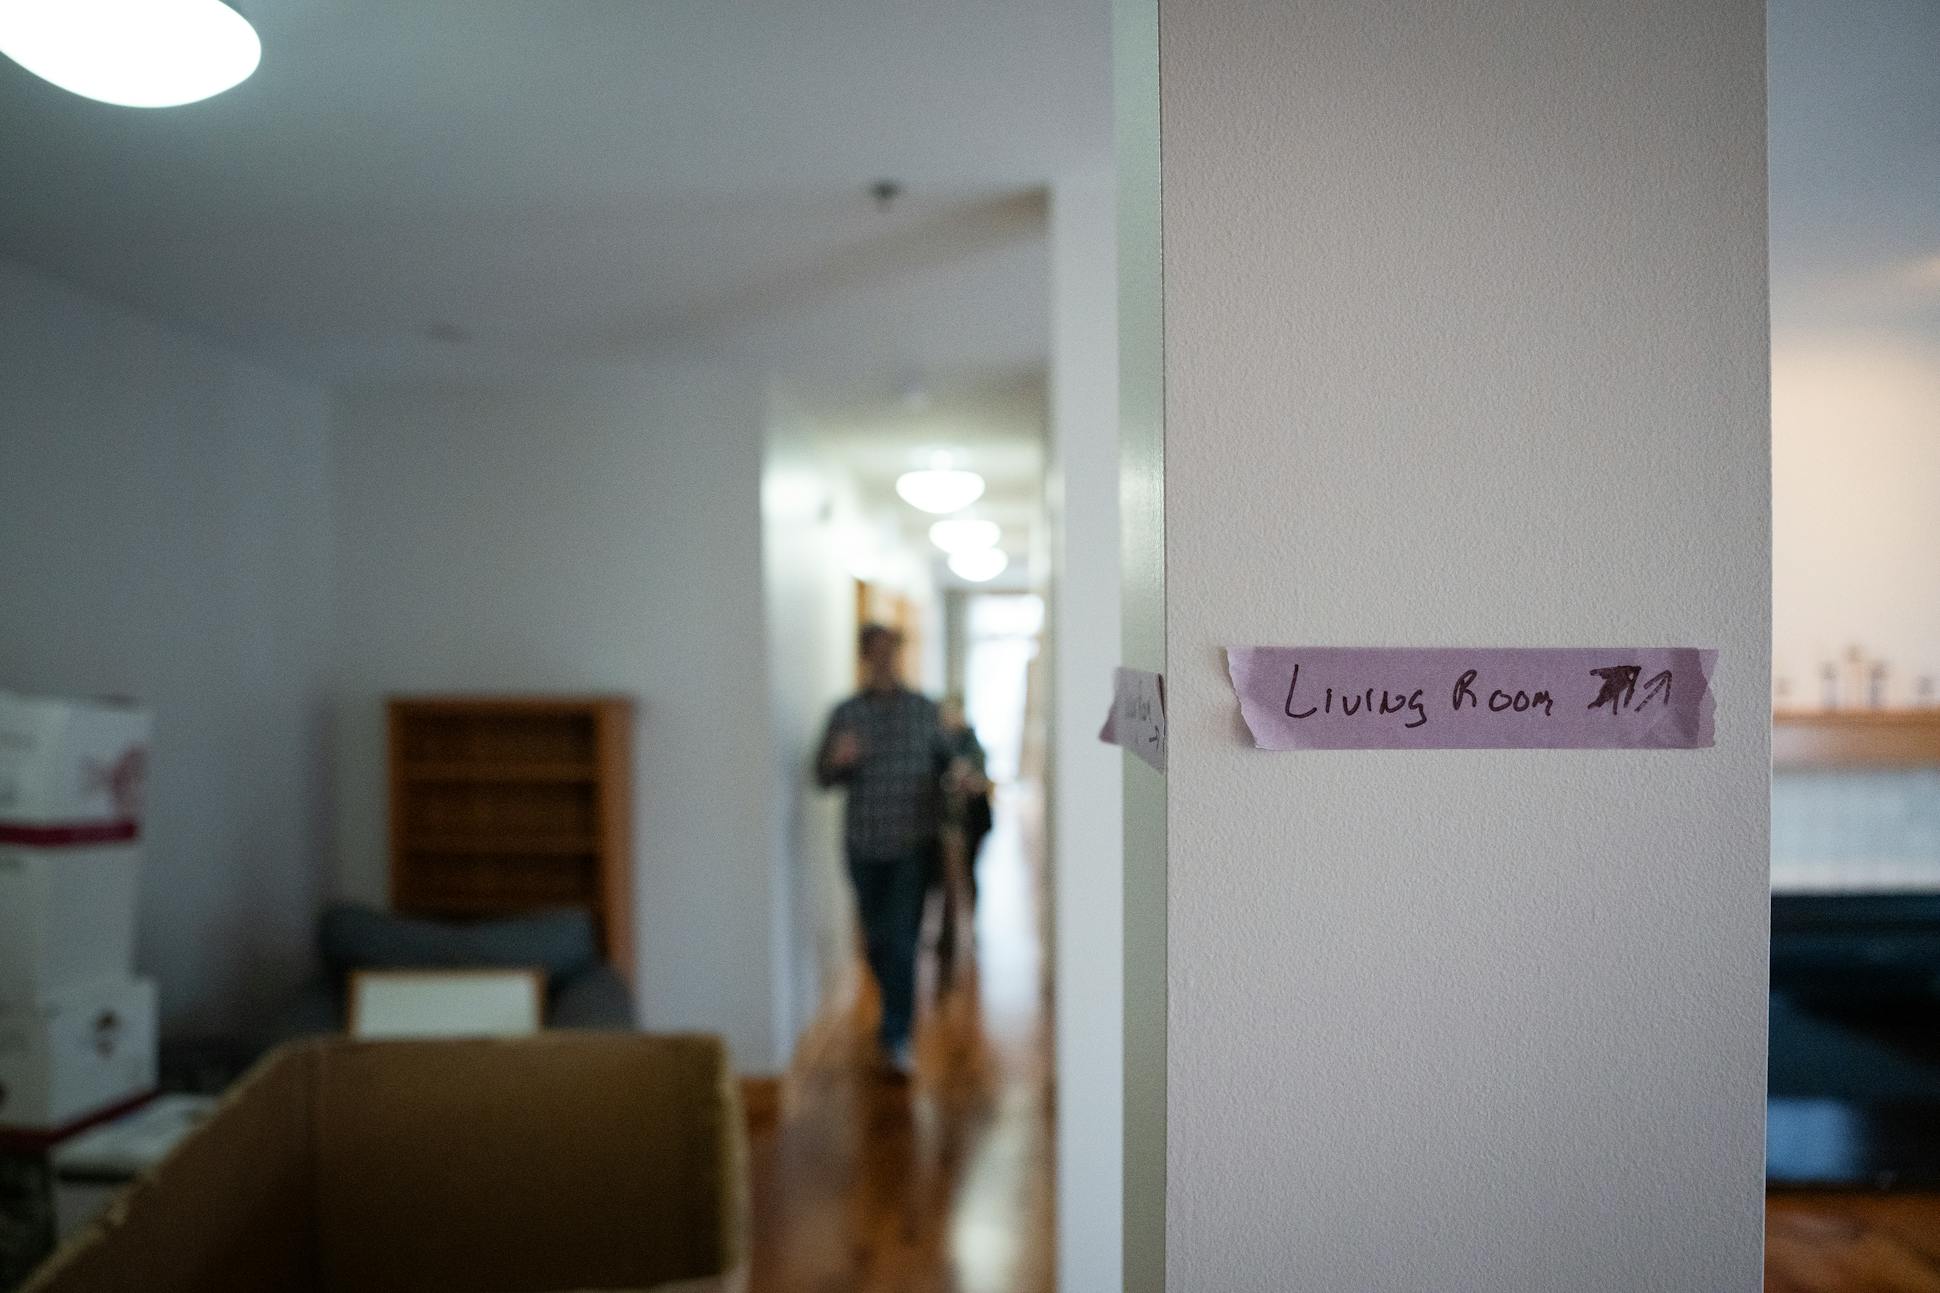 To assist movers, rooms are identified with tape inside Dominic Papatola’s new home on Grand Avenue in St. Paul.